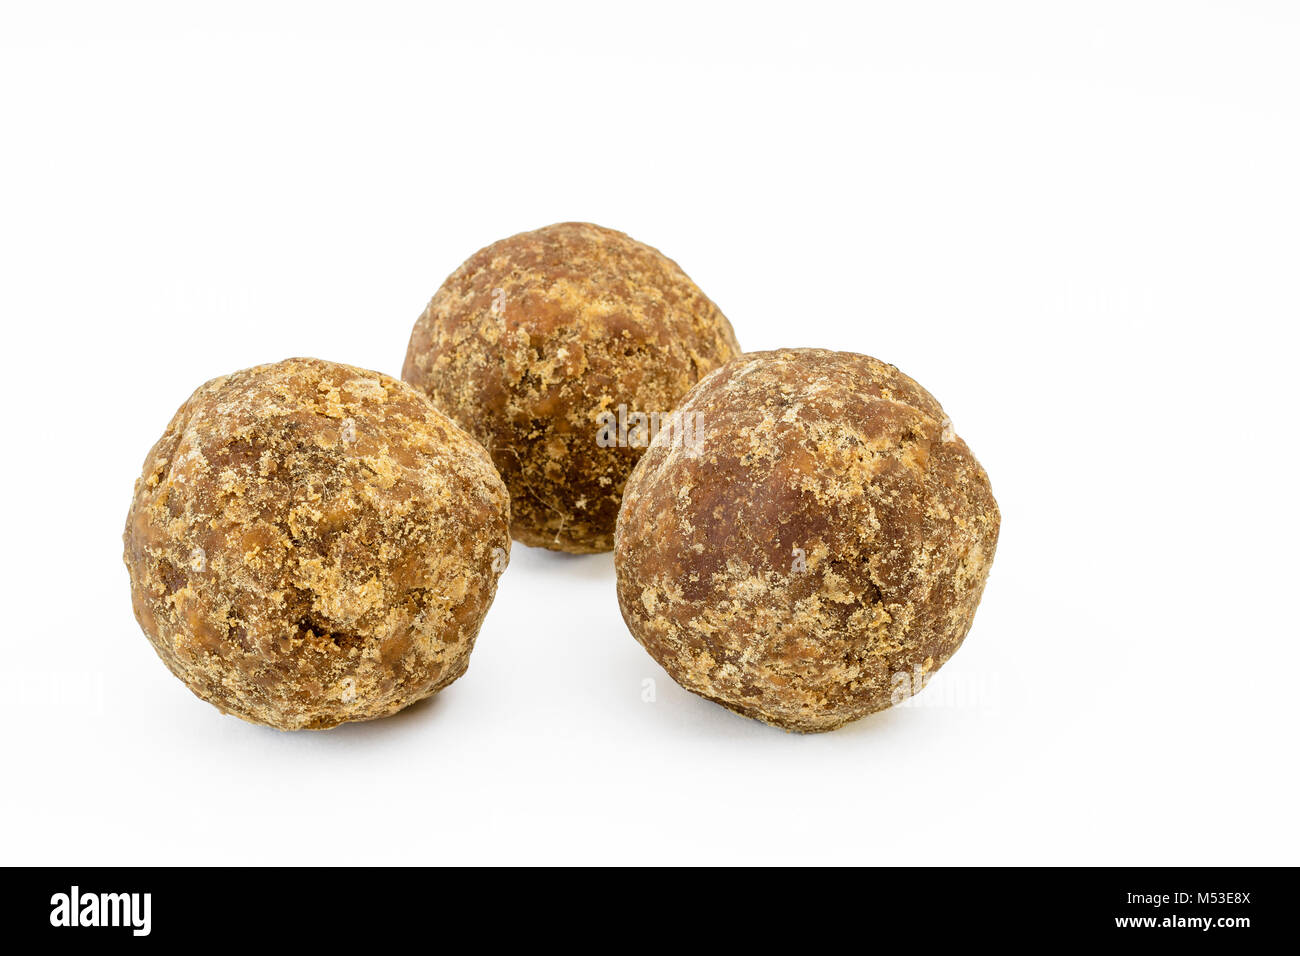 Indian palm sugar or jaggery on a white background Stock Photo